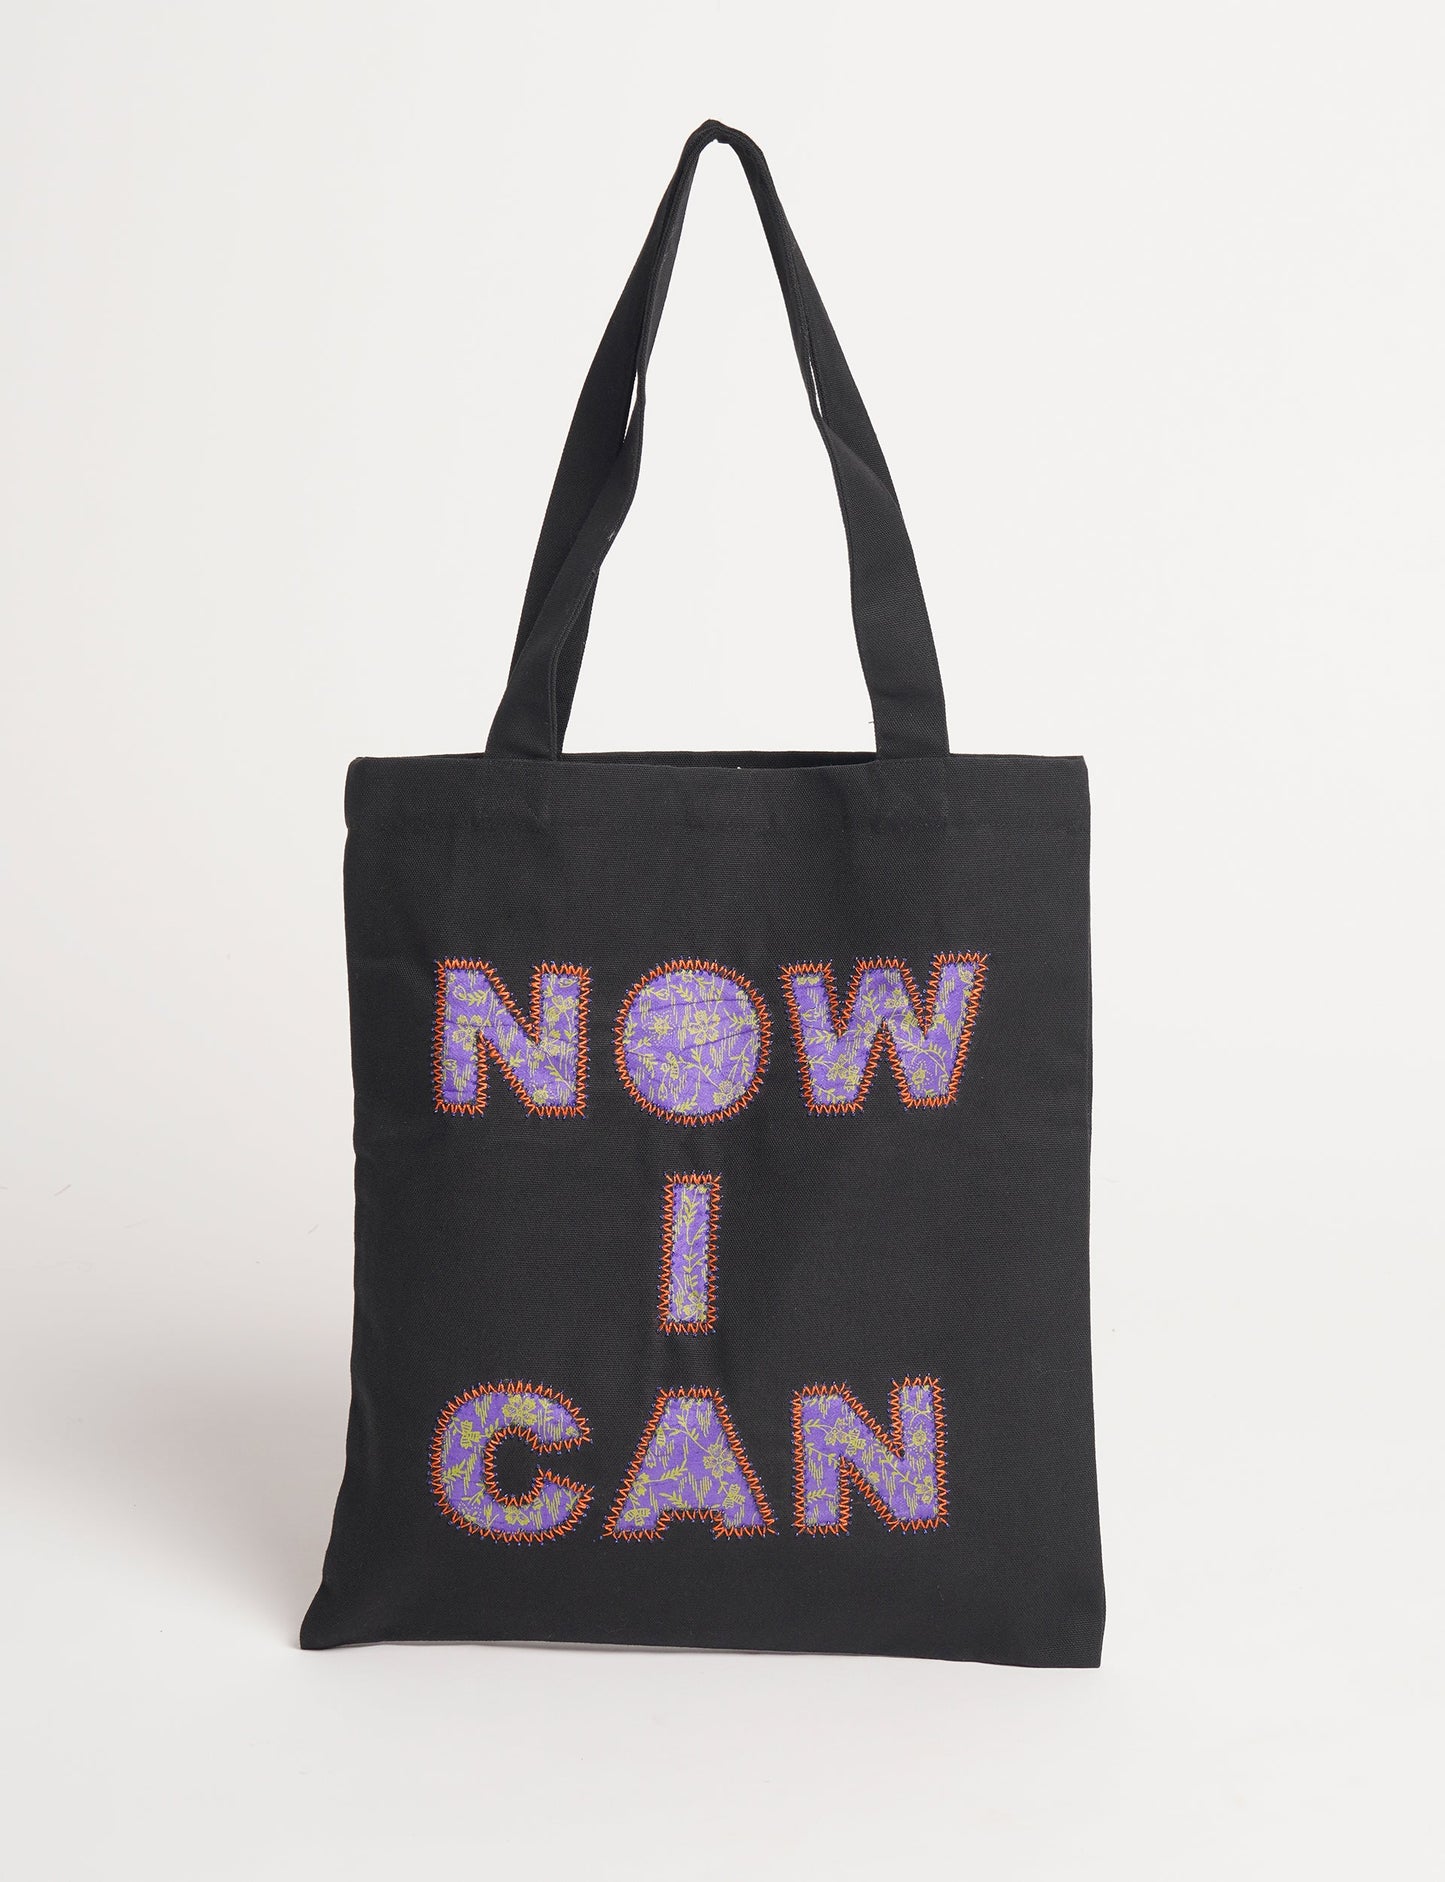 Discover empowerment with our NOW I CAN TOTE BAG – a distinctive piece from our embroidery collection, commemorating positive transformations in the lives of our women artisans. Each bag signifies empowerment, from community pride to supporting education dreams. Carefully crafted with embroidered signatures, these bags are not only visually appealing but also embody the artisans' journeys and the reincarnation of pre-loved saris into a new form – as your treasured bag.